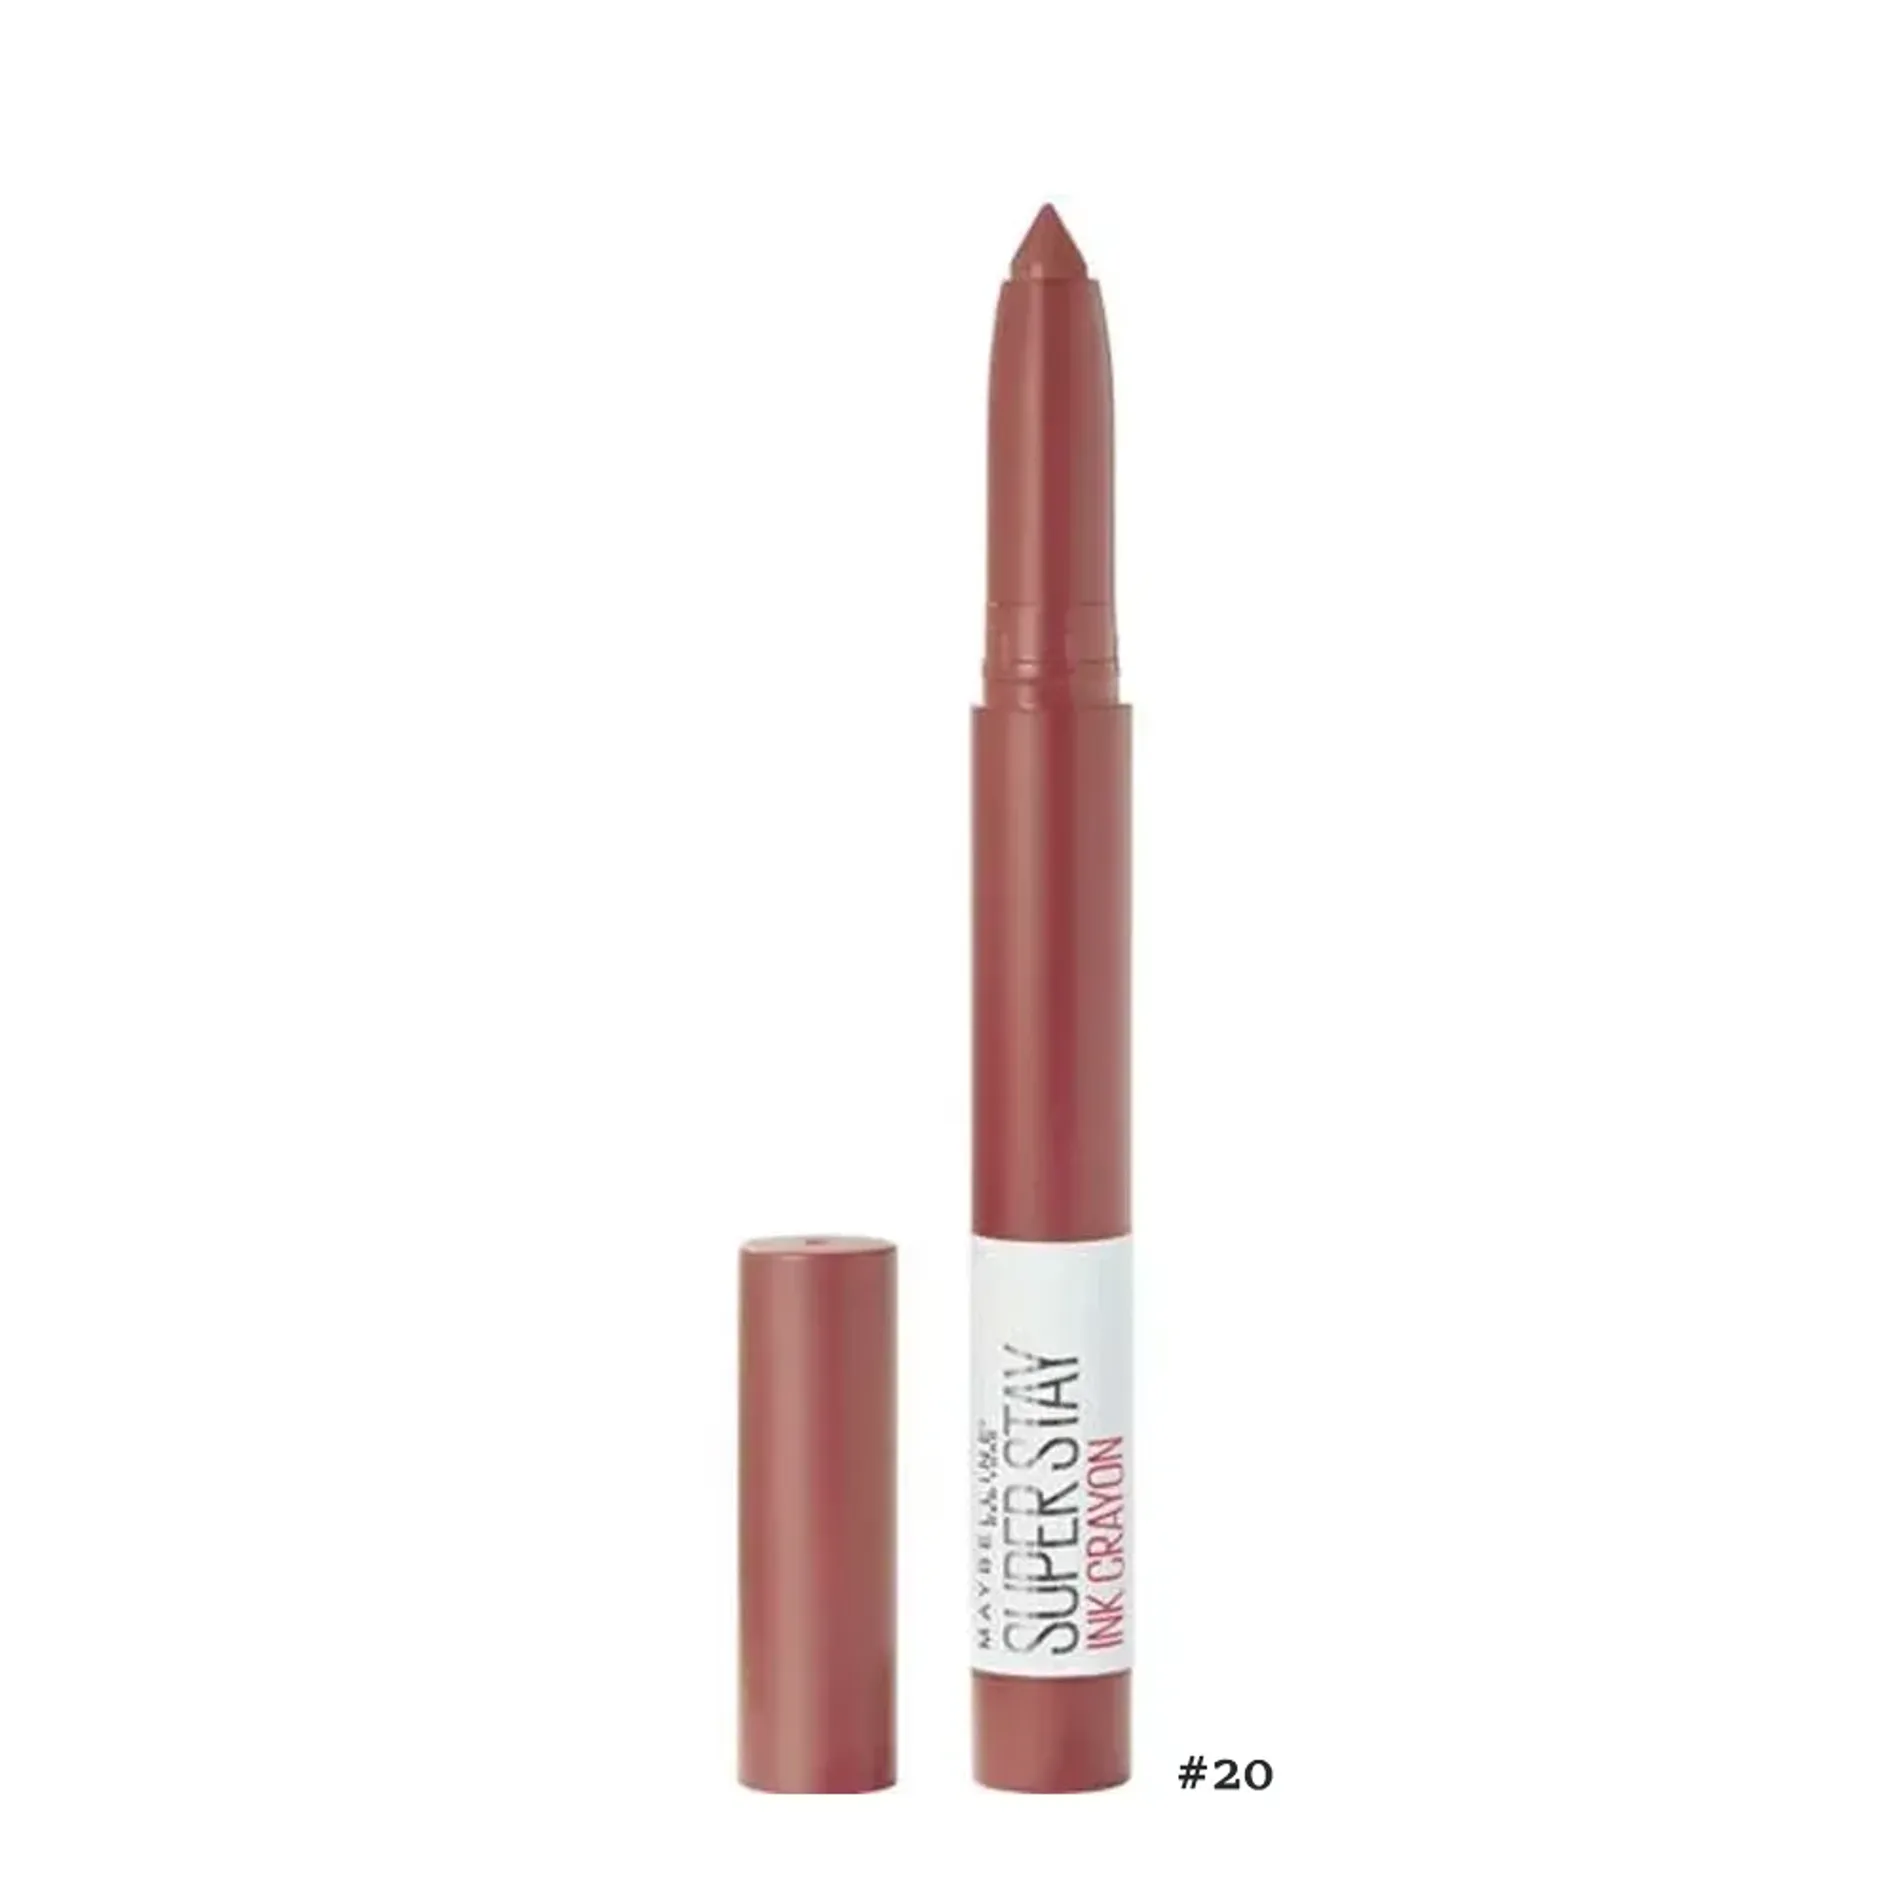 son-but-chi-lau-troi-maybelline-superstay-ink-crayon-3-9g-13